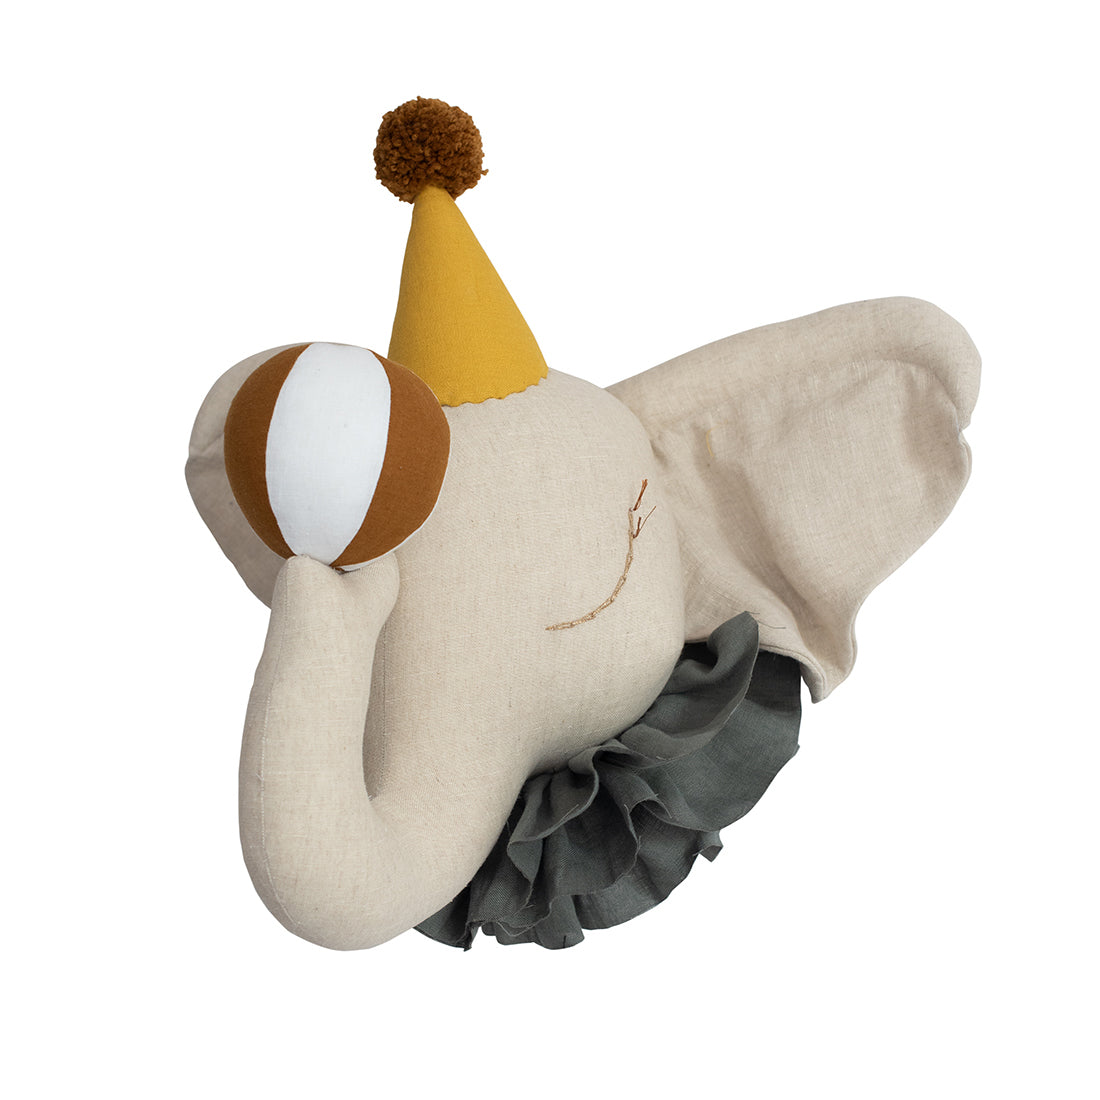 ELEPHANT CIRCUS WITH A YELLOW CAP - Wall Decoration - TilianKids